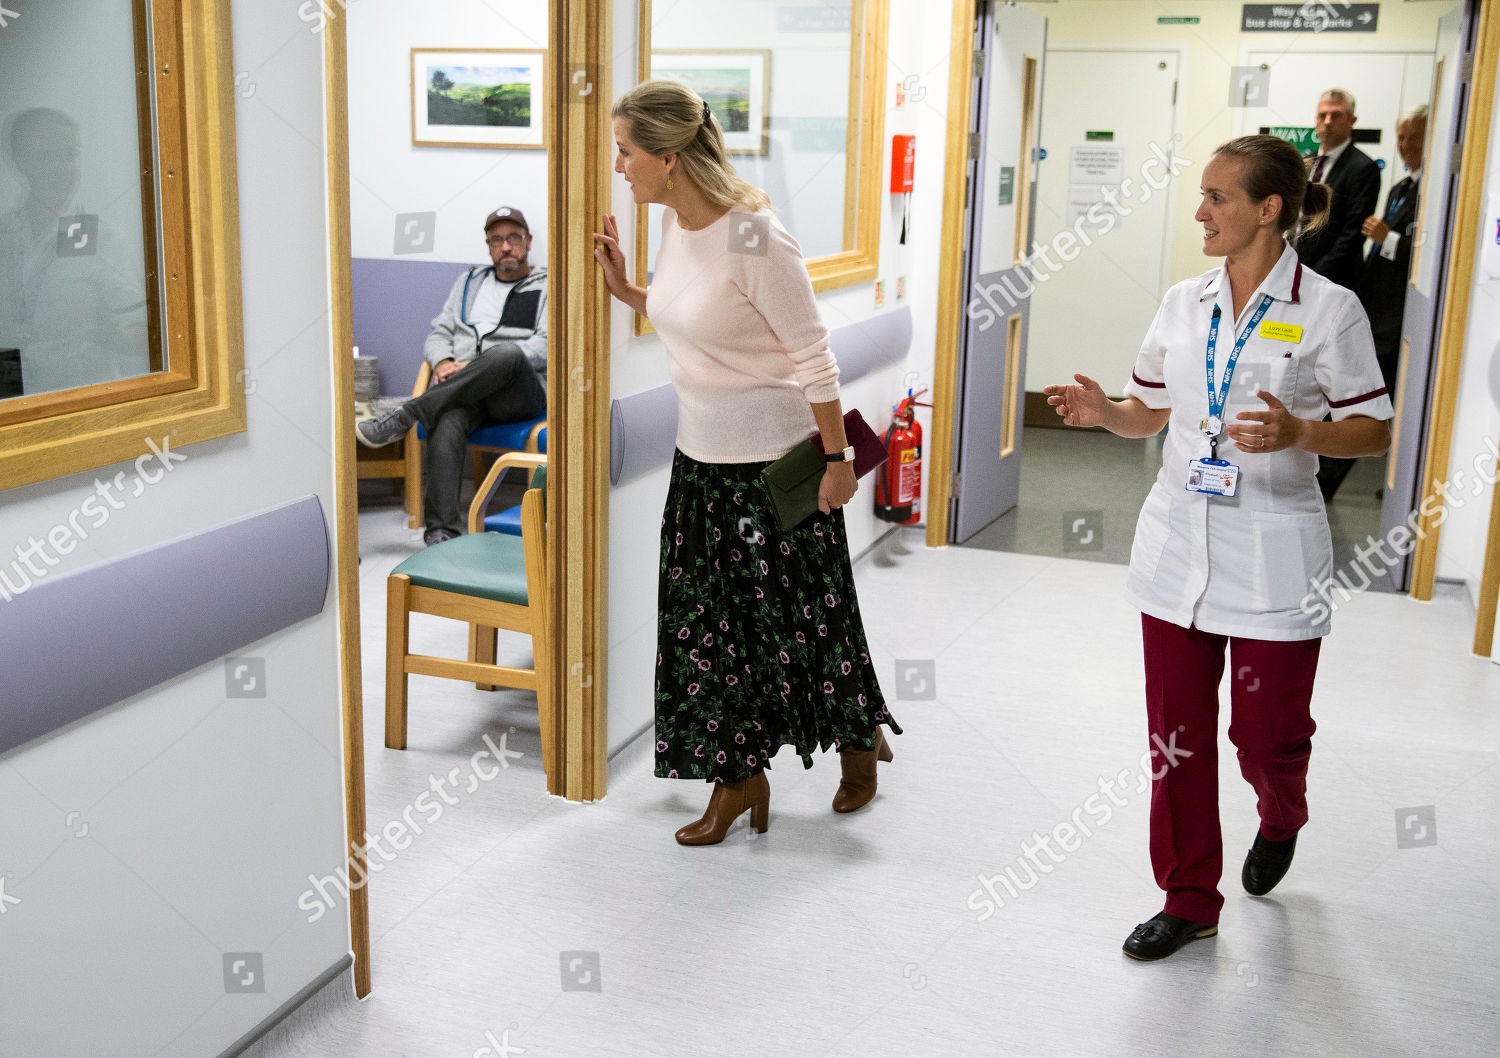 sophie-countess-of-wessex-visit-to-musgrove-park-hospital-taunton-somerset-uk-shutterstock-editorial-10422506an.jpg